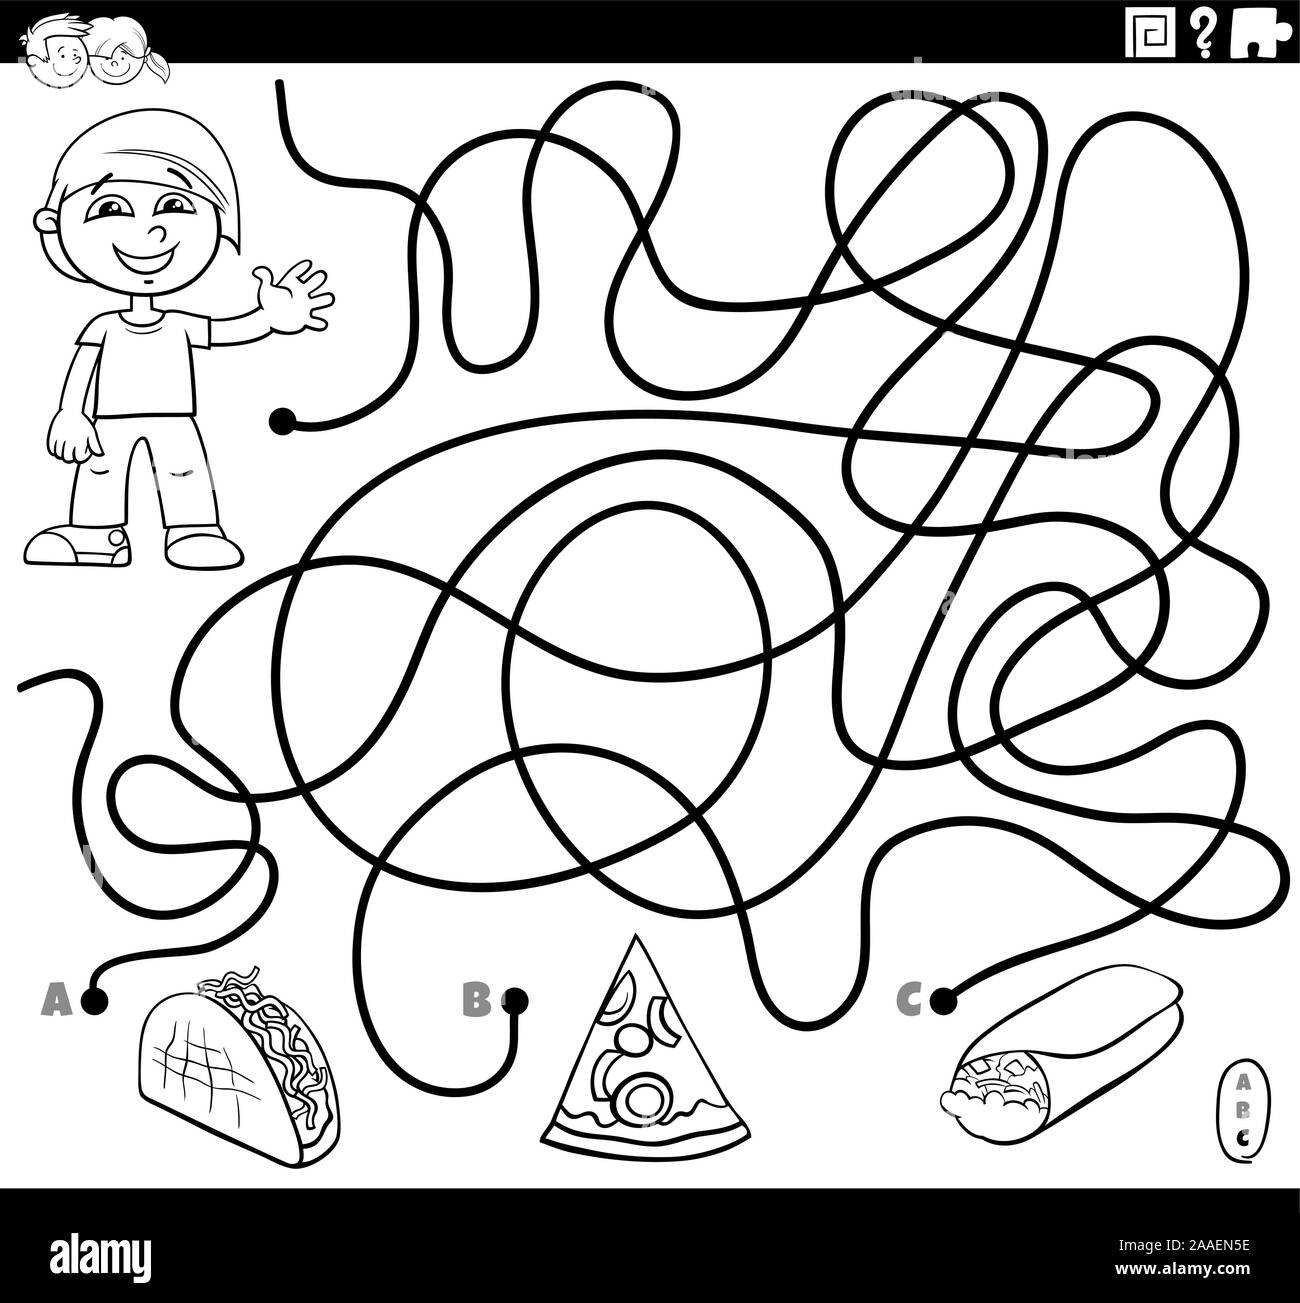 Black and White Cartoon Illustration of Lines Maze Puzzle Activity Game with Boy Character and Food Objects Coloring Book Page Stock Vector